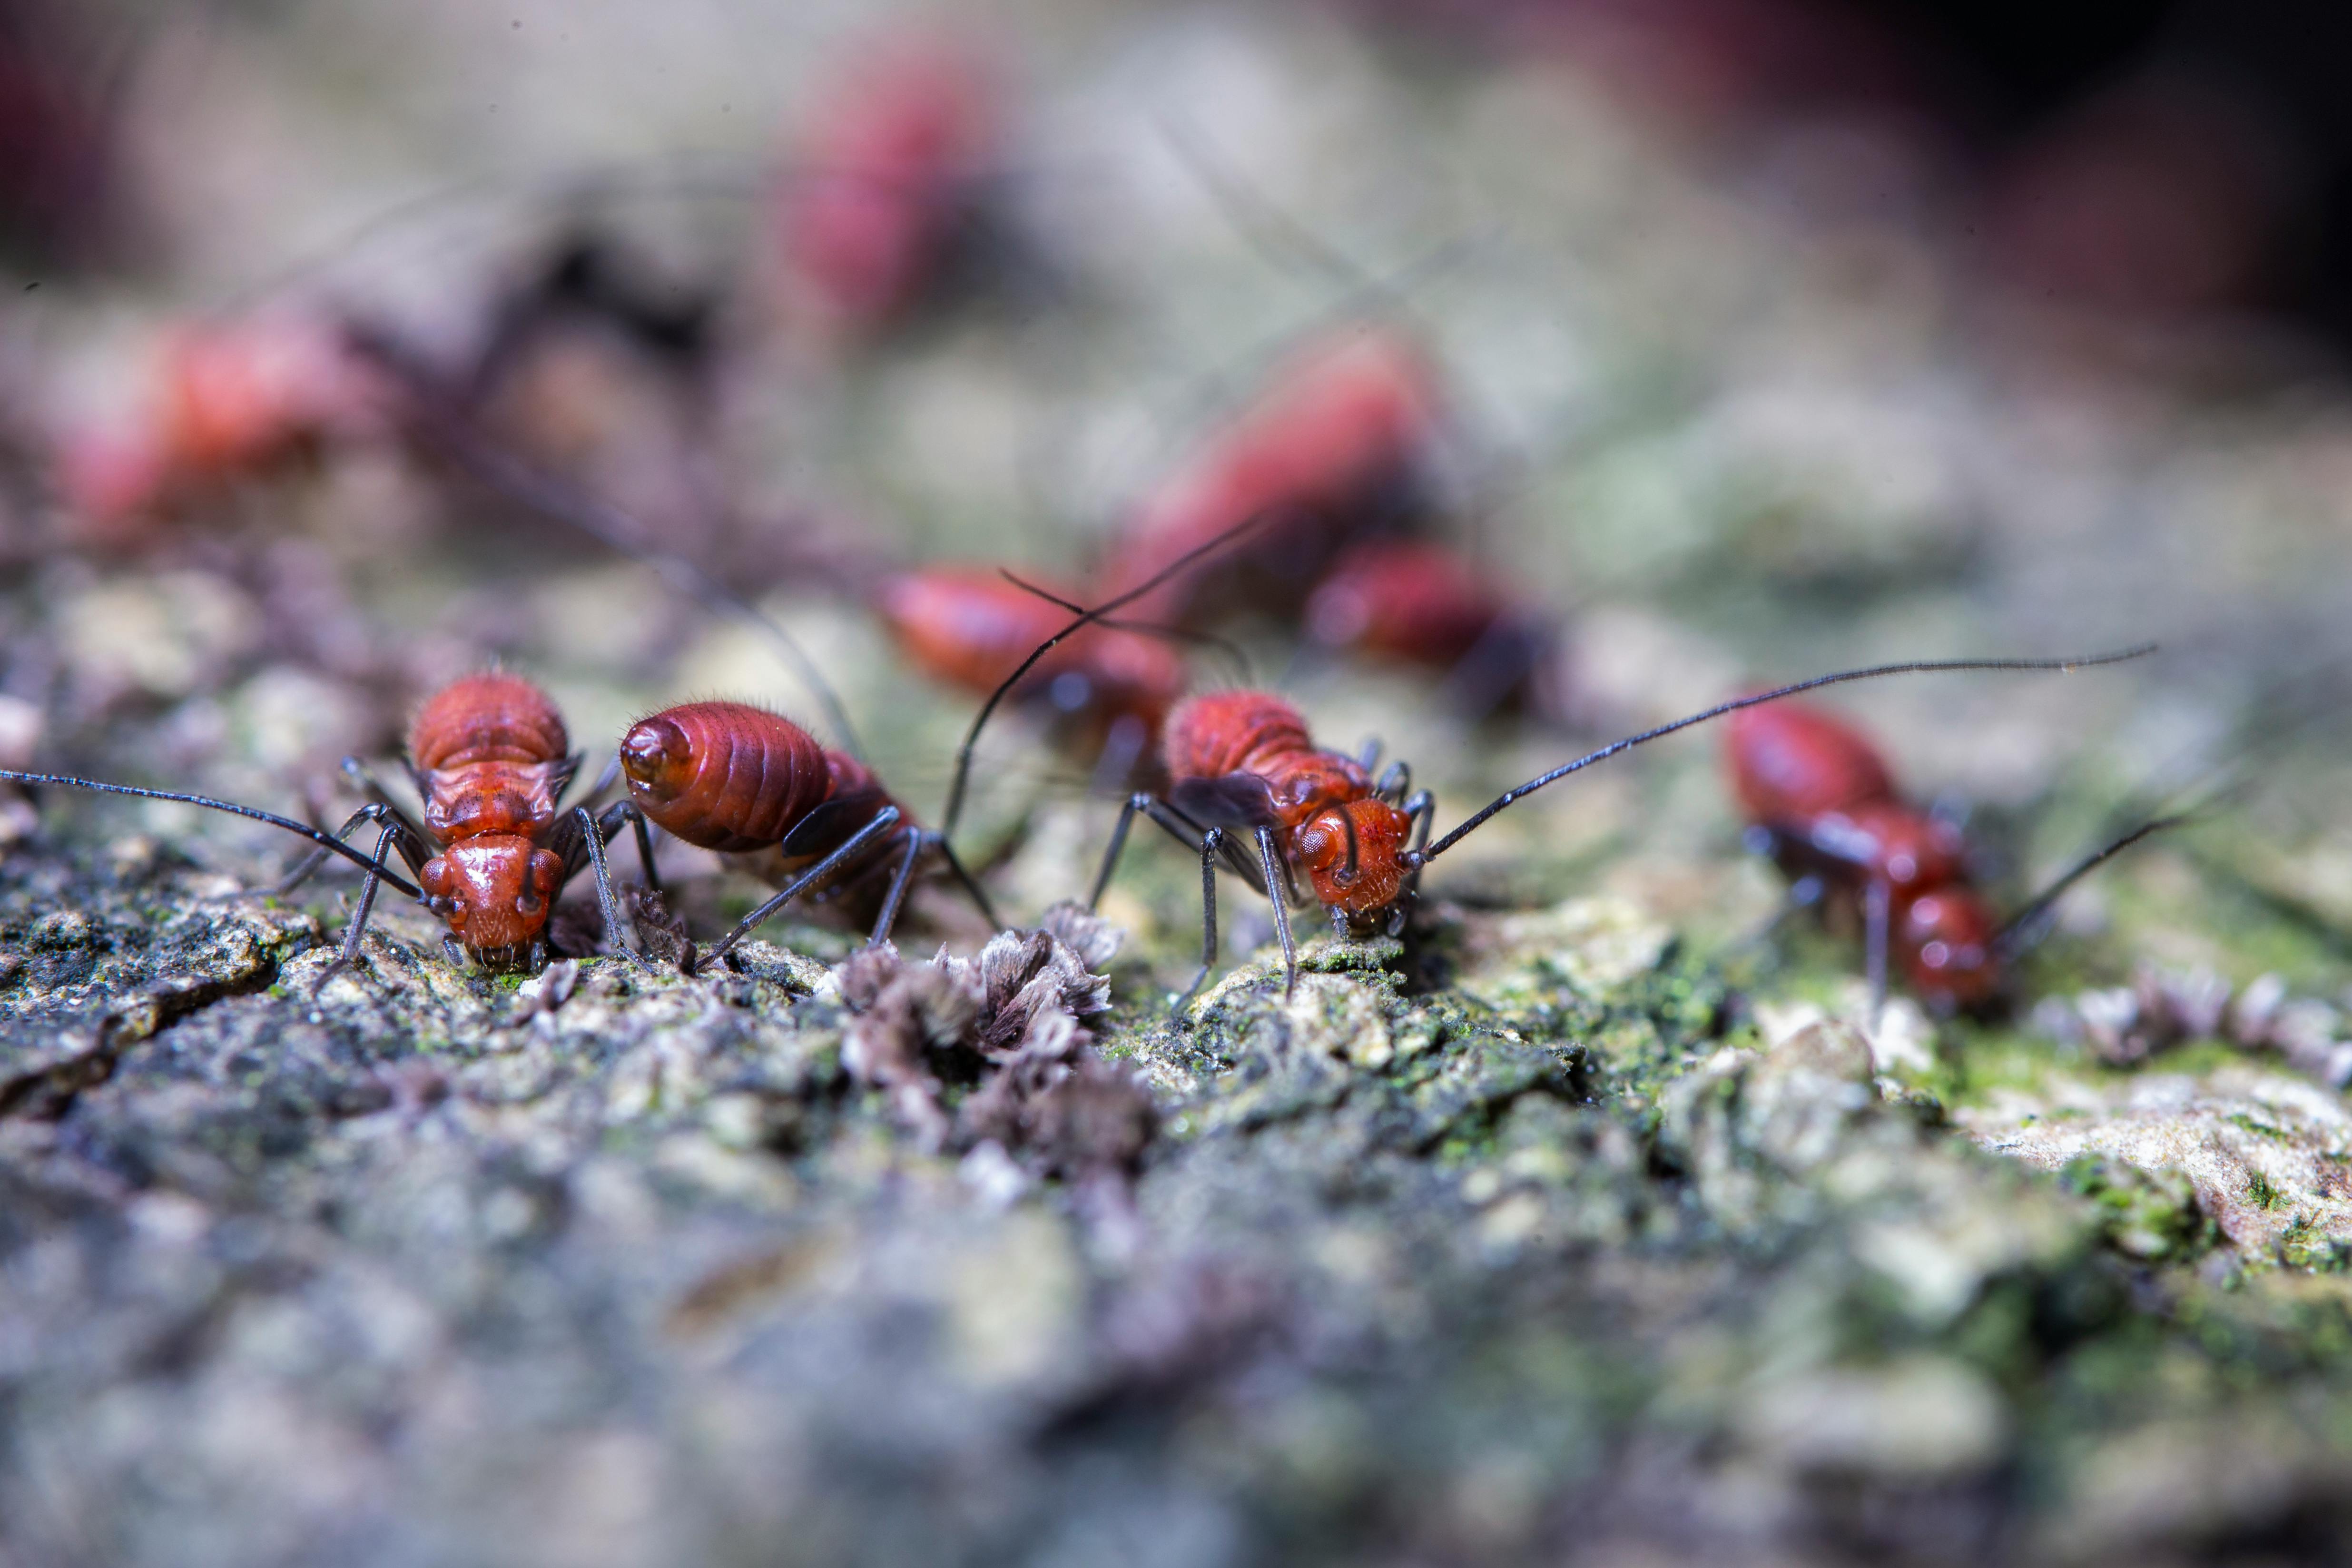 Ant Control Experts in Leander, TX